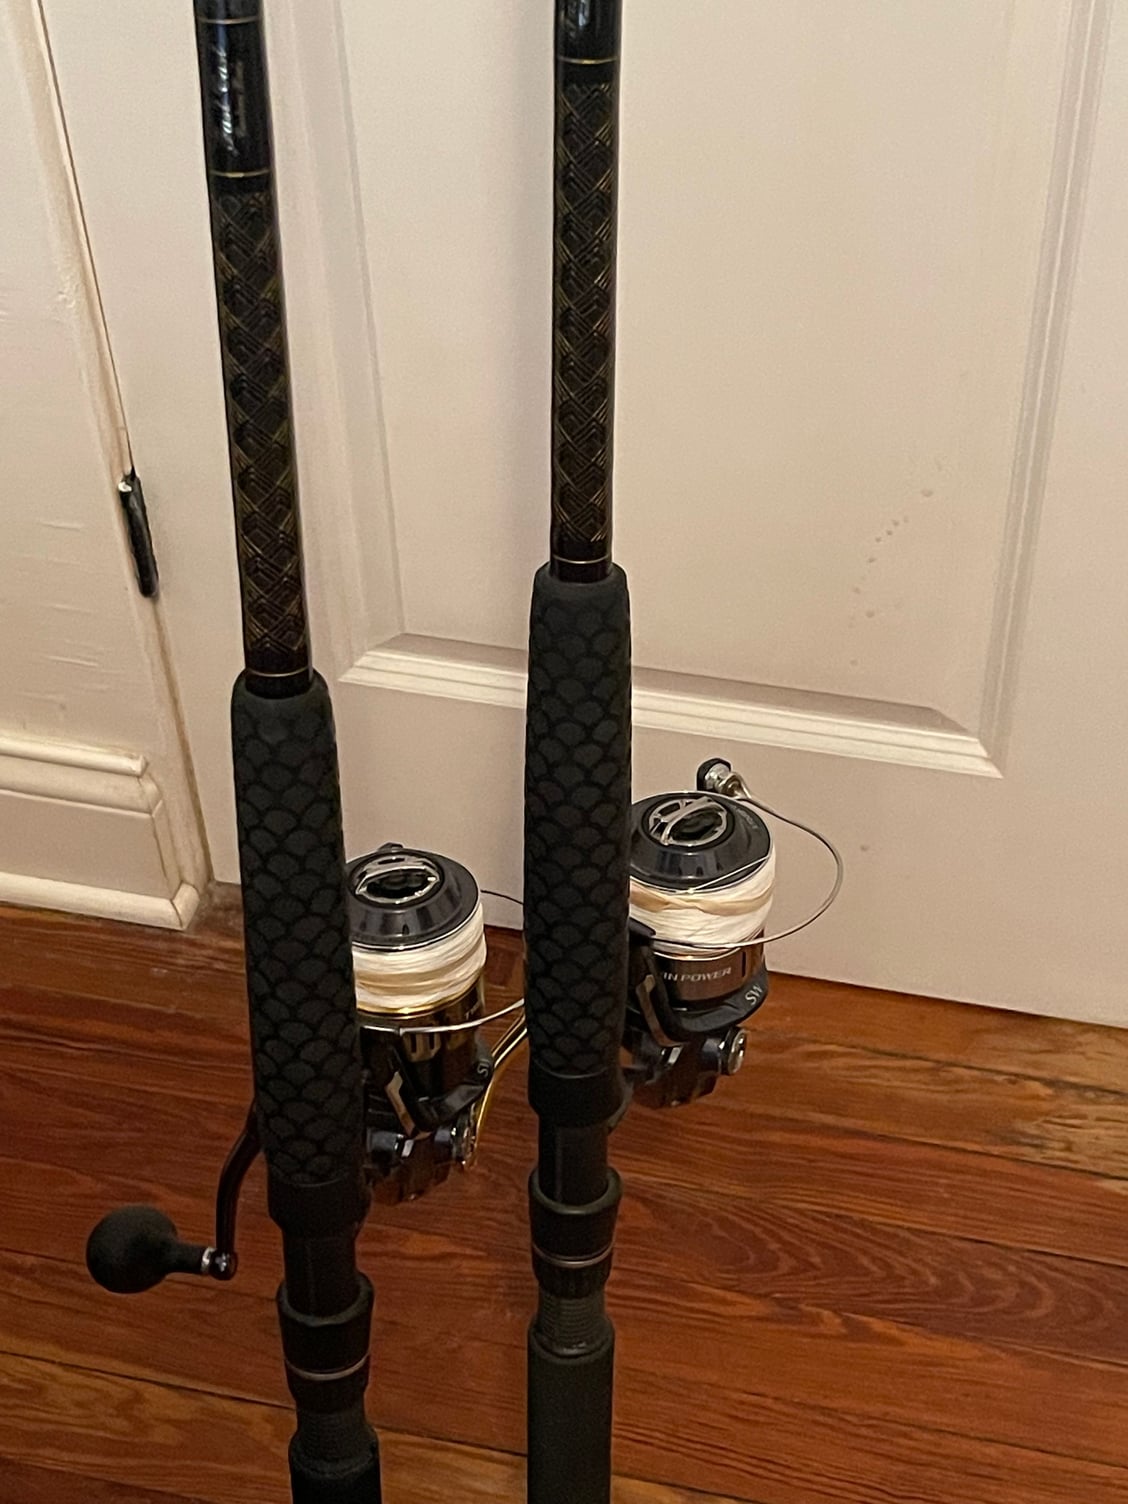 Calstar grafighter 900L shimano twinpower 10000 14000 tarpon spinning rods  - The Hull Truth - Boating and Fishing Forum